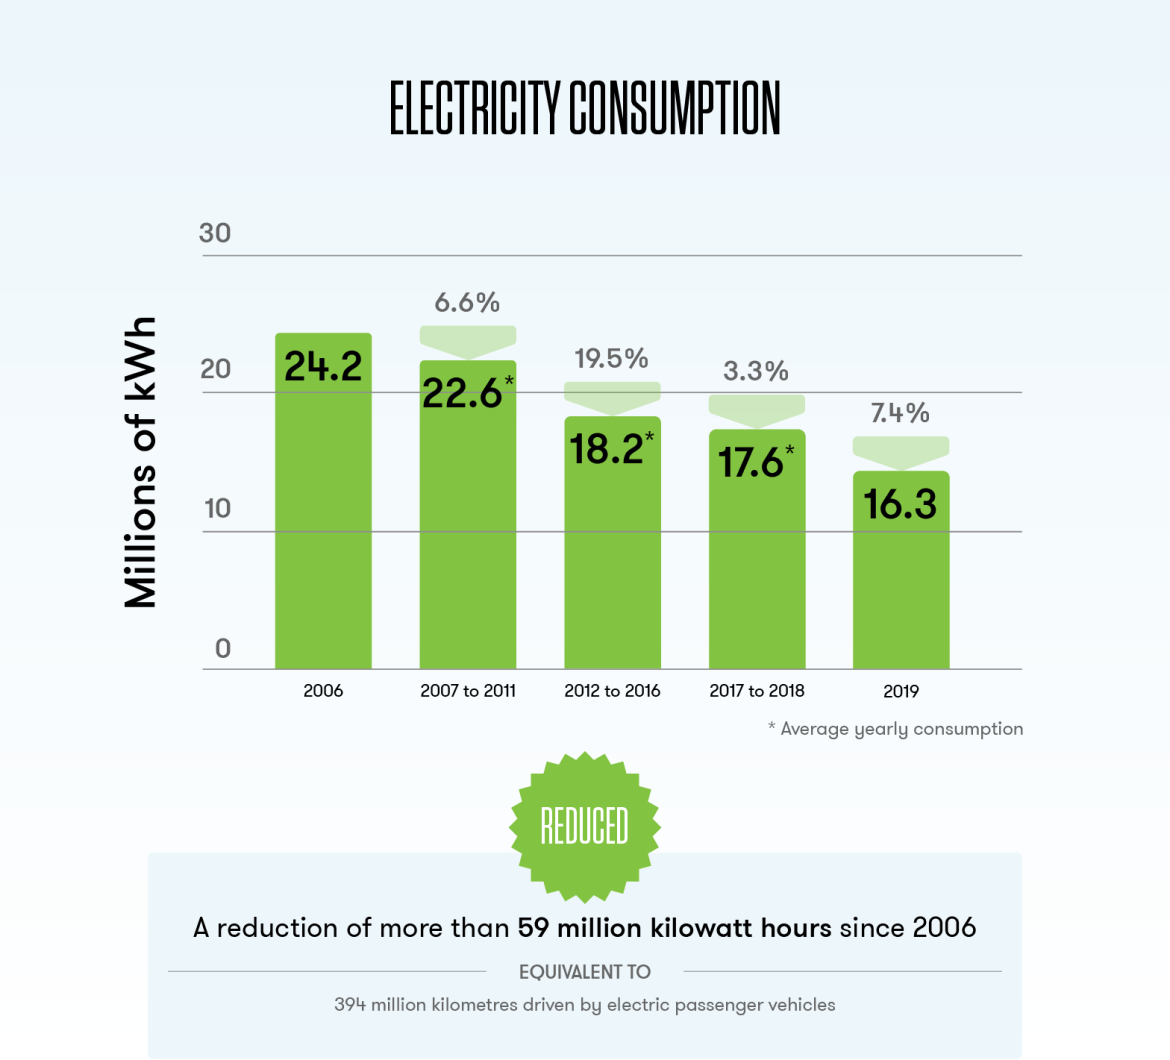 This bar graph shows that the CN Tower has reduced its electricity consumption by more than 59 million kilowatt hours between 2006 and 2019, the equivalent to 394 million kilometres driven by electric passenger vehicles.